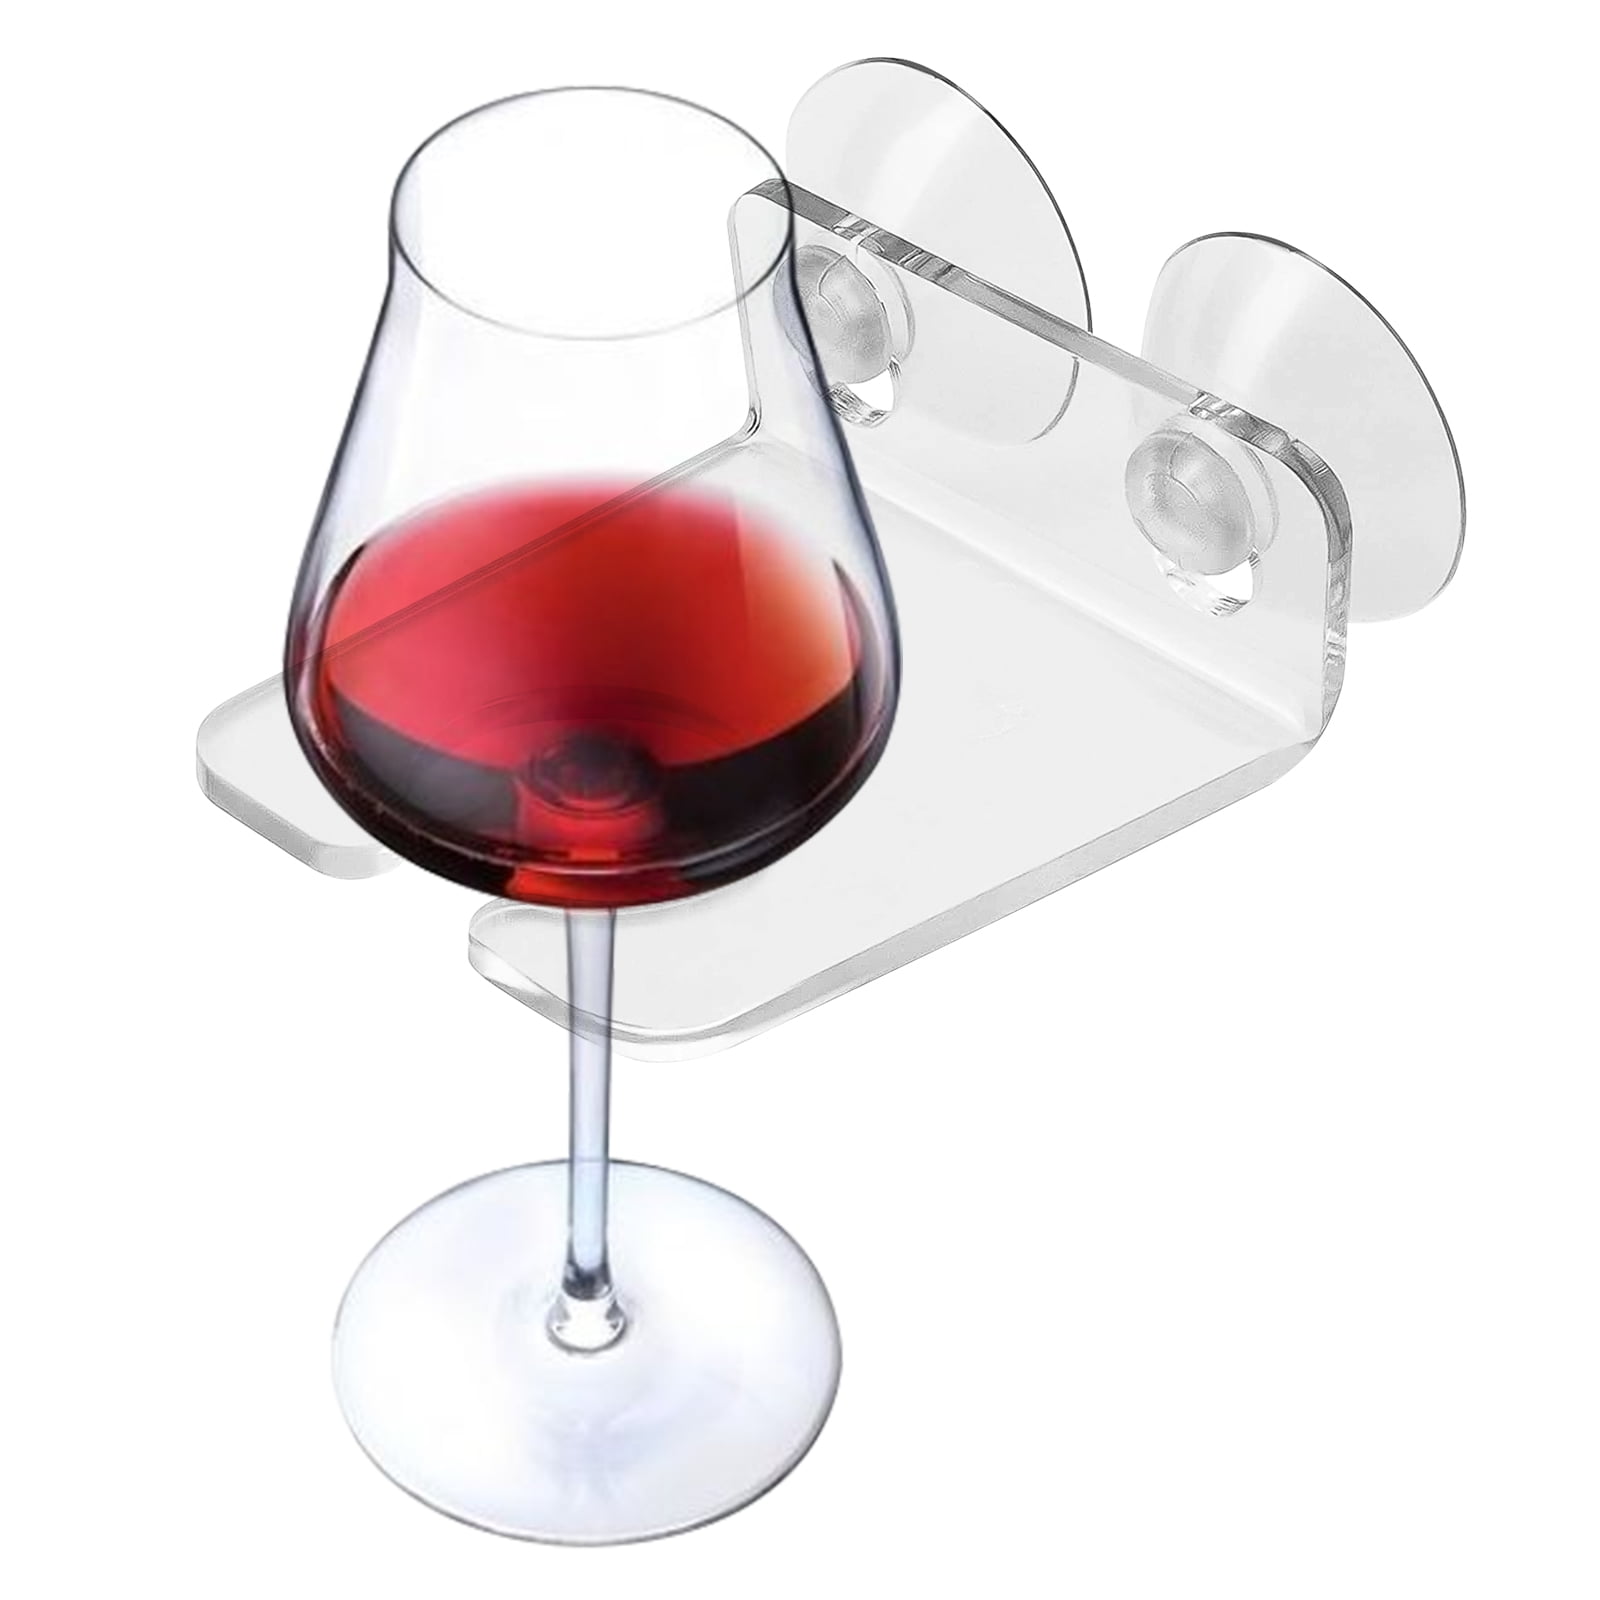 Details about   Portable and Foldable Wine Glass Holder Shower & Bath Suction Cup Wine Gifts 